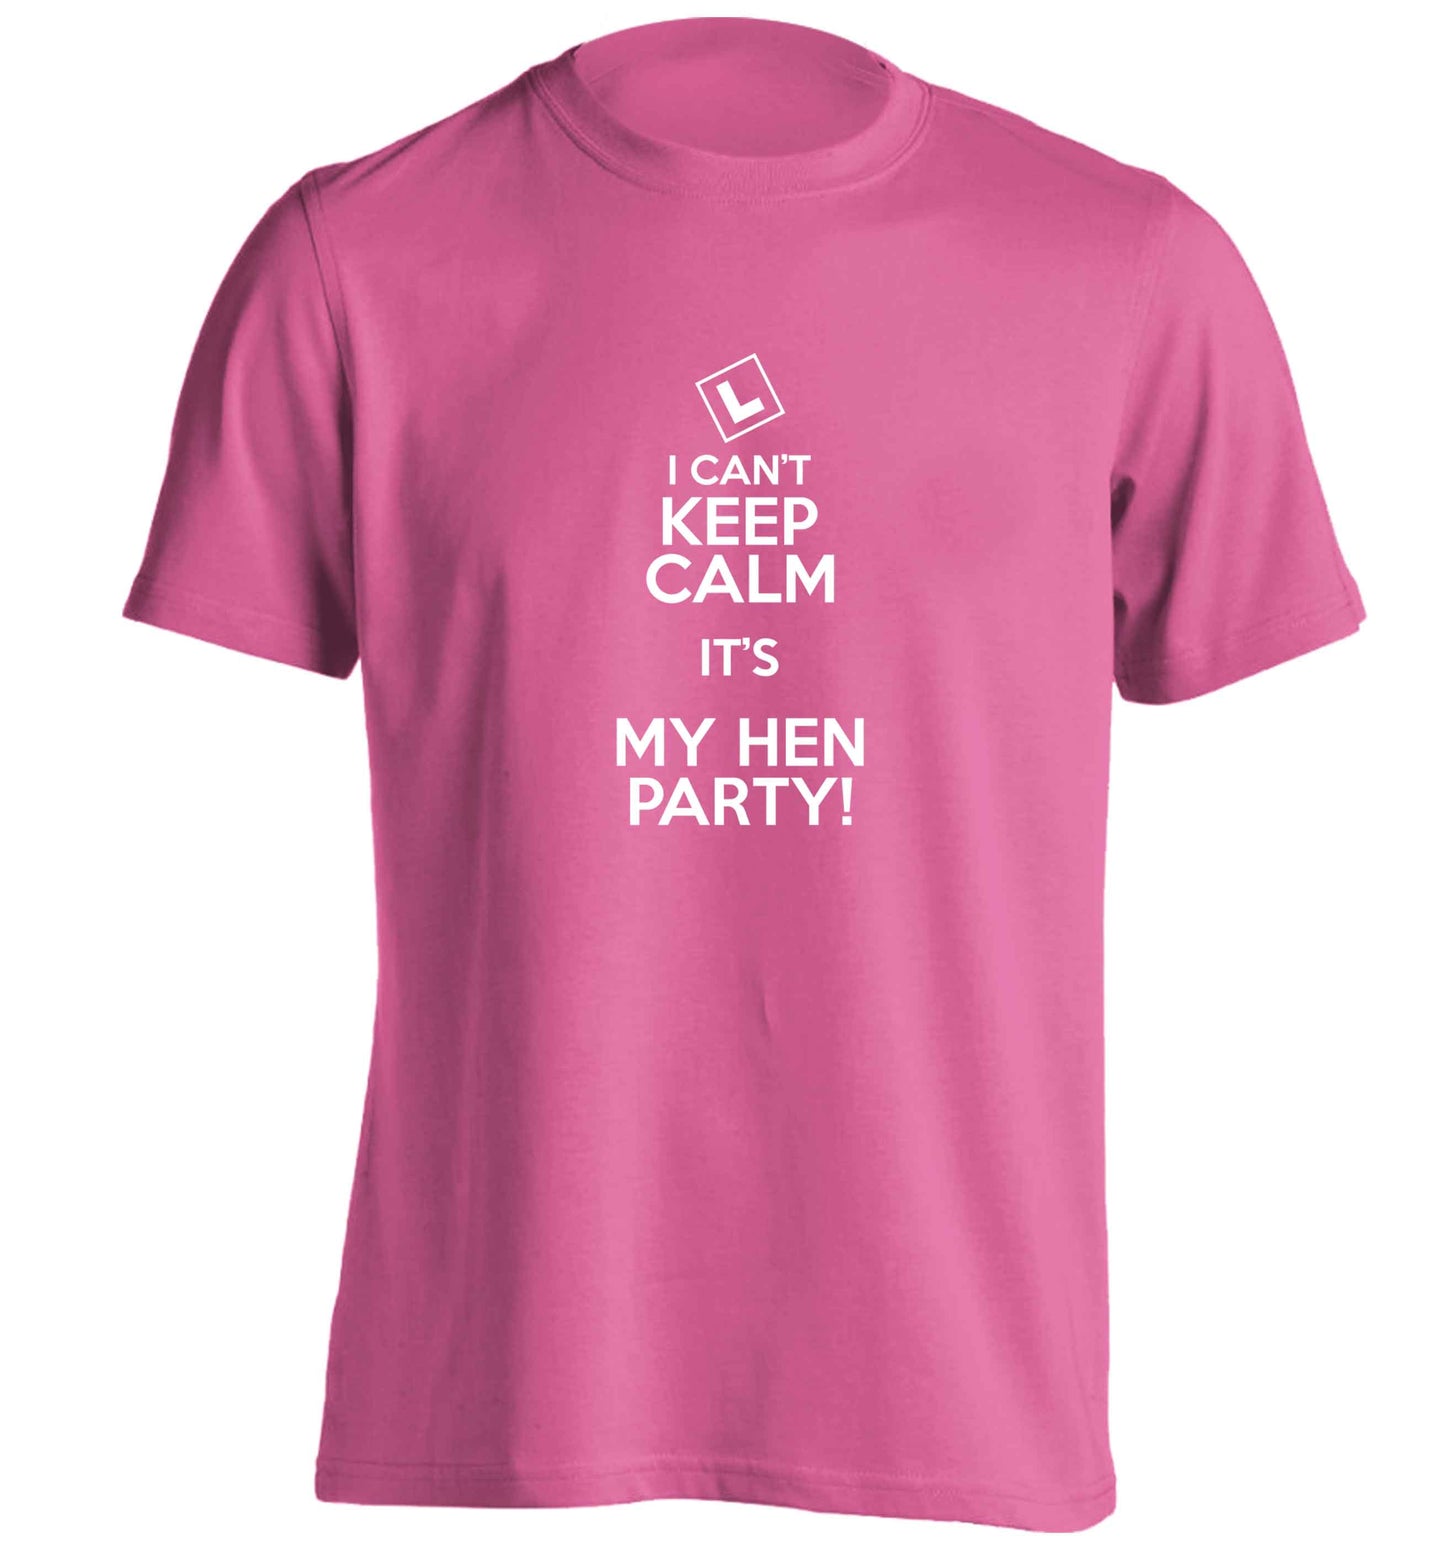 I can't keep calm it's my hen party adults unisex pink Tshirt 2XL